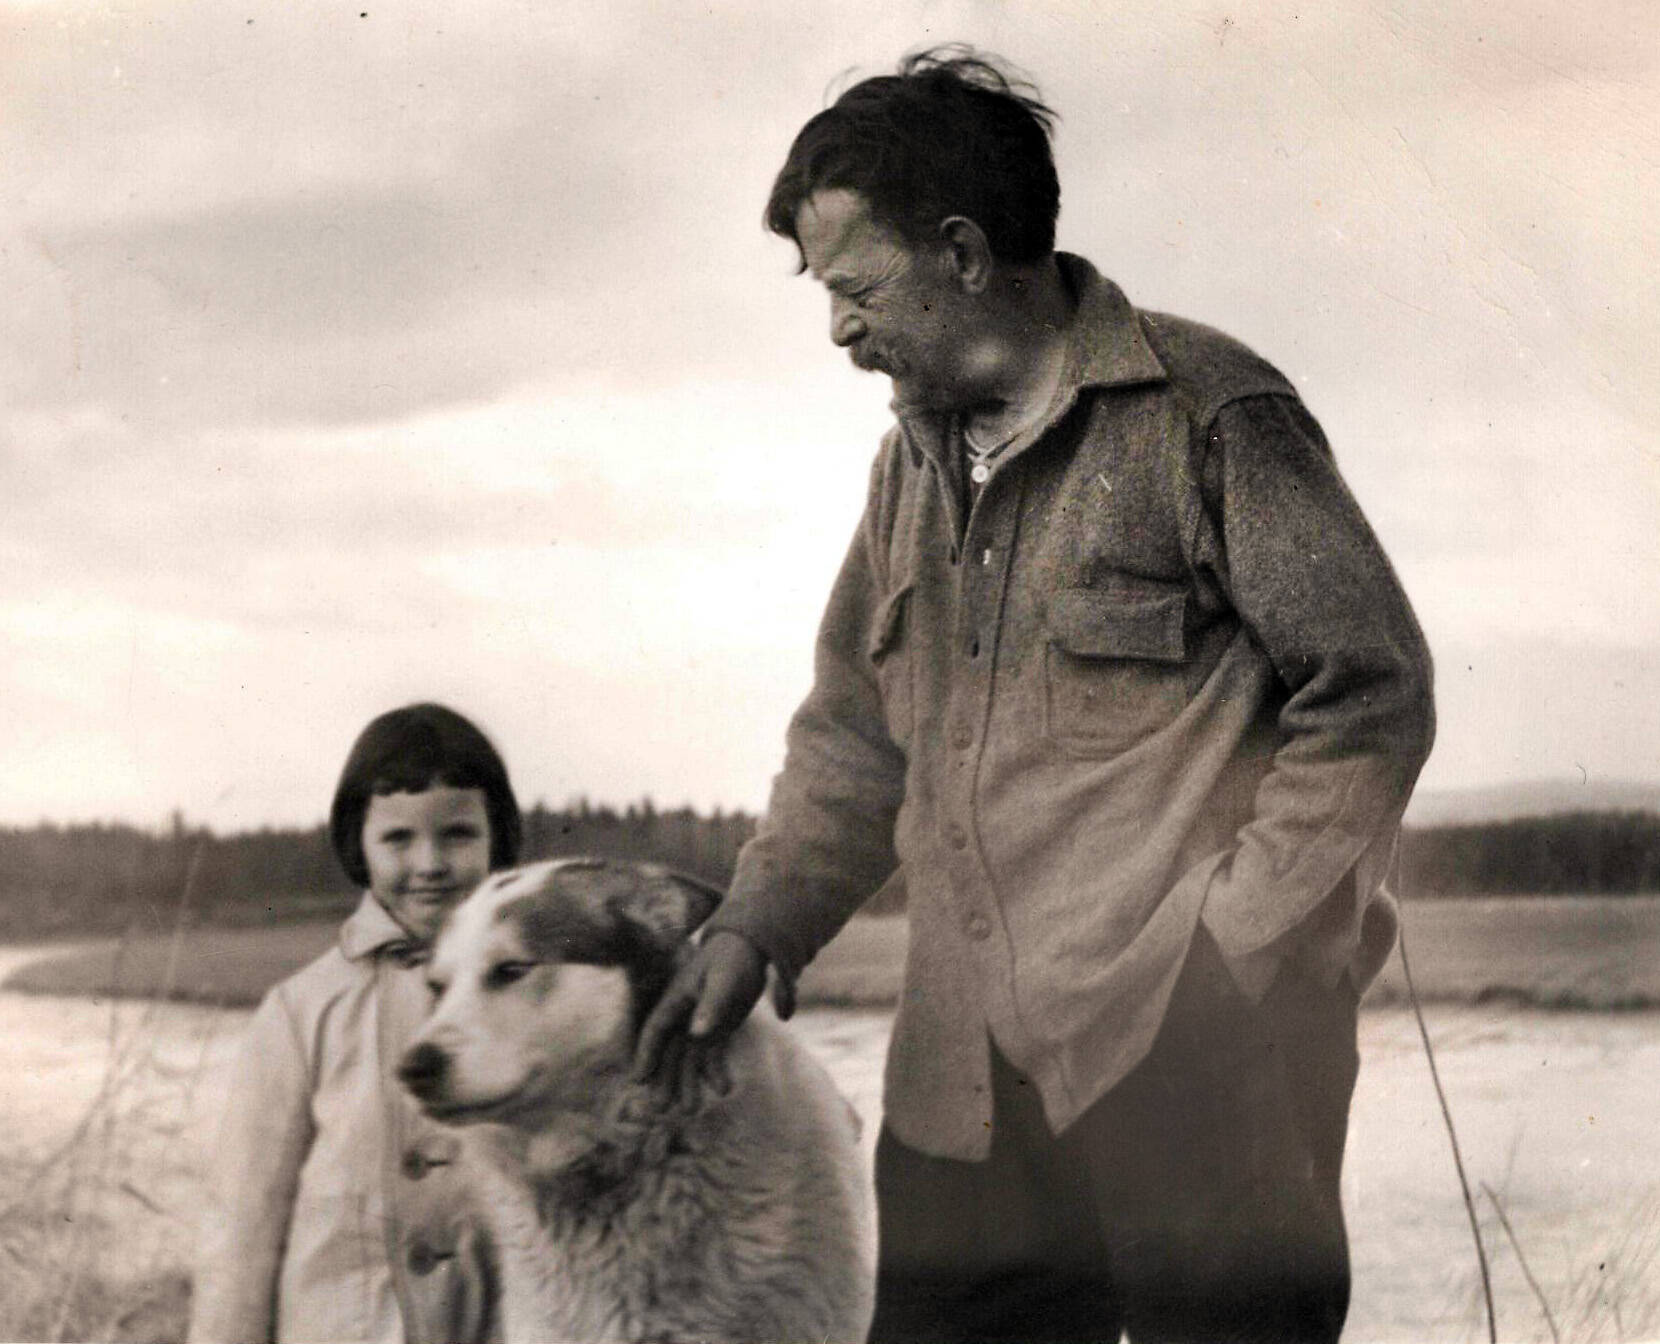 In this Knackstedt Collection photo, probably from circa the 1940s, Windy Wagner enjoys the company of young Lori Lancashire and a friendly dog. (Photo courtesy of the Knackstedt Collection)